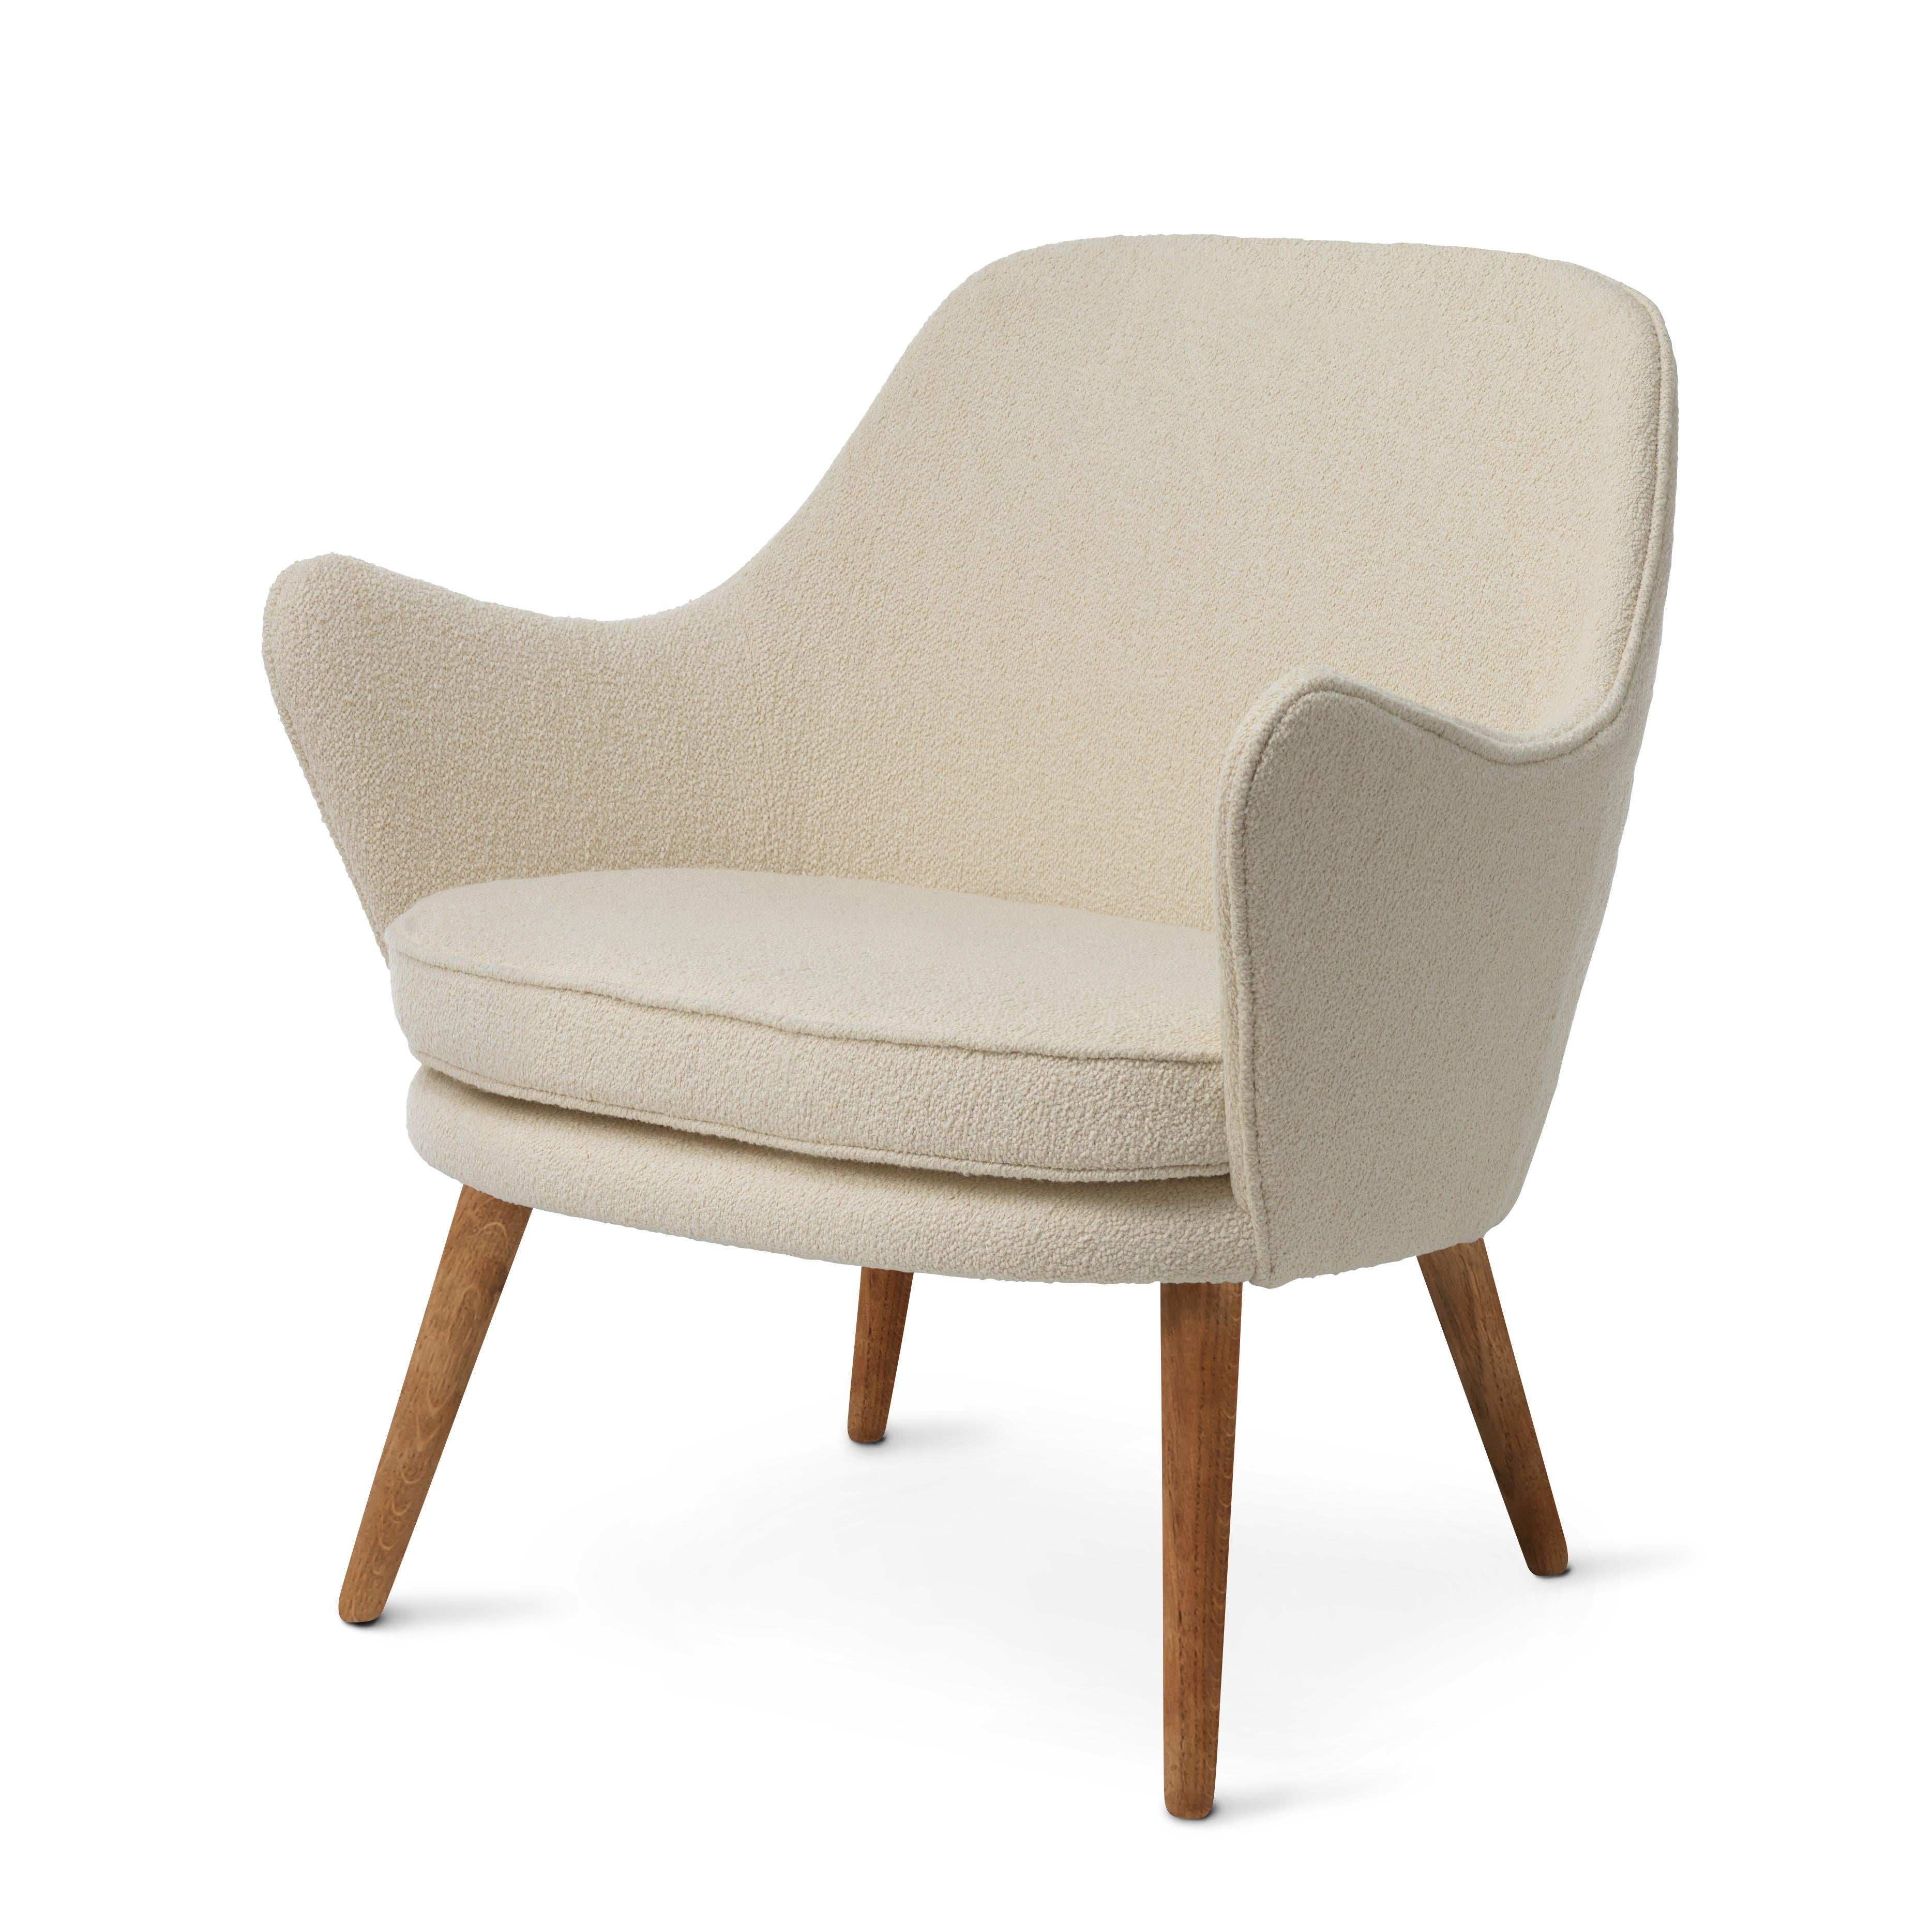 For Sale: White (Barnum 24) Dwell Lounge Chair, by Hans Olsen from Warm Nordic 2